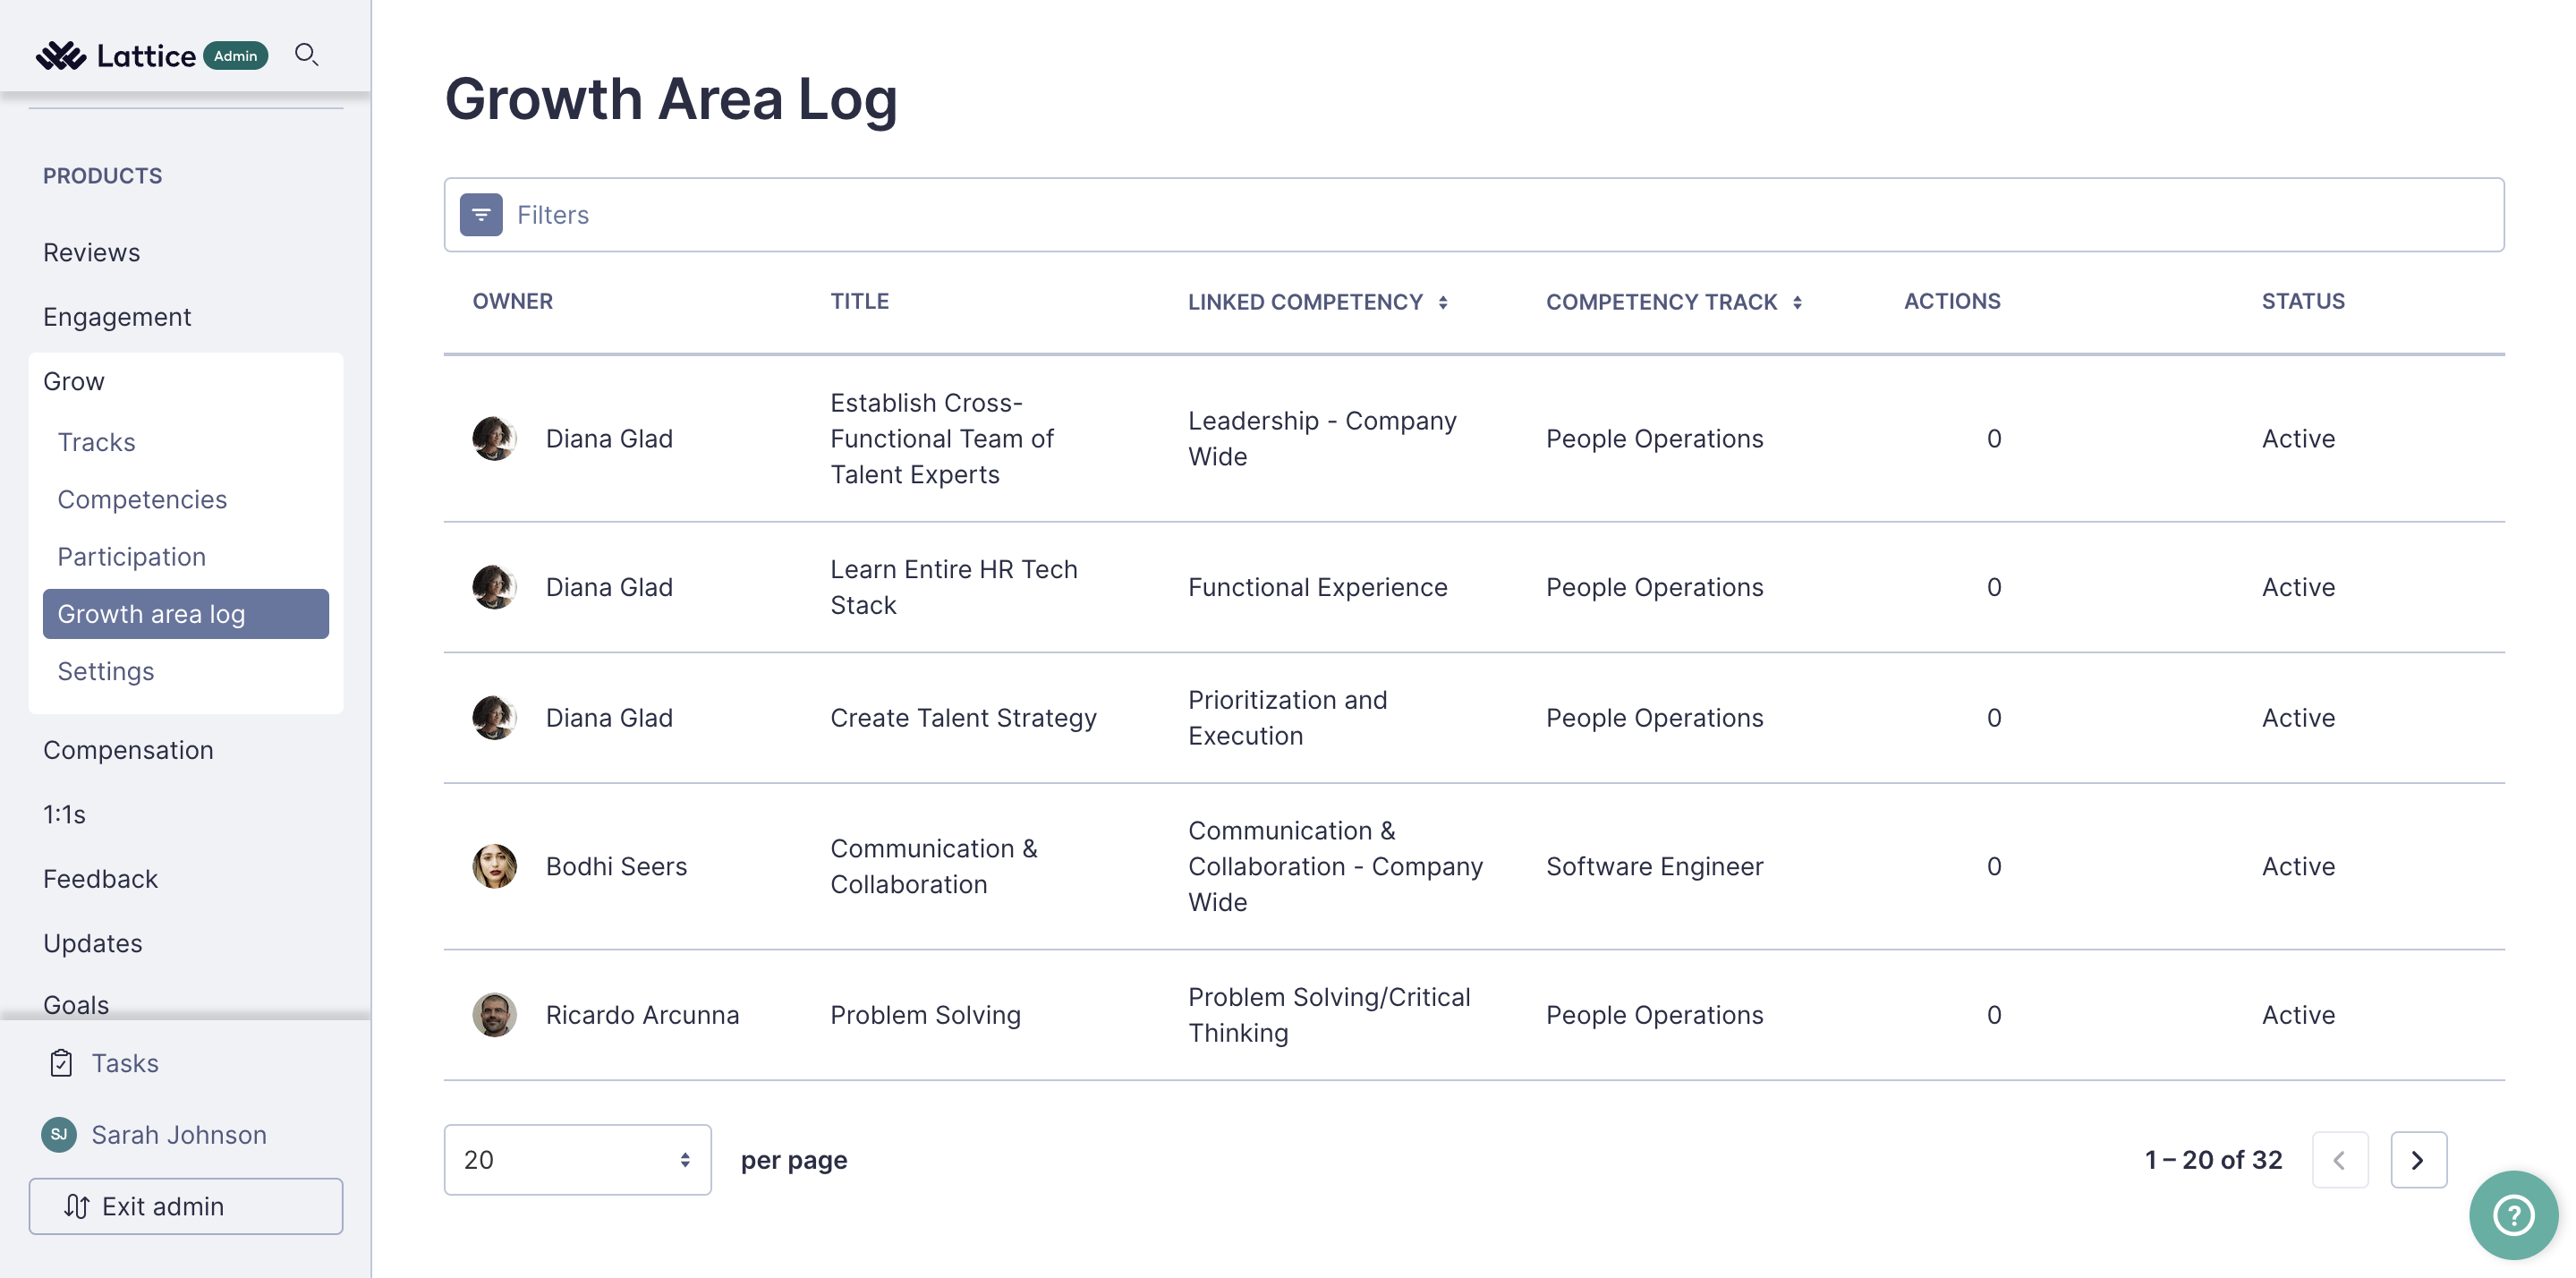 Growth Area Log page. The page includes an employee table that lists the every growth area created alongside the owner name, growth area title, linked competency, competency track, number of actions, and status.